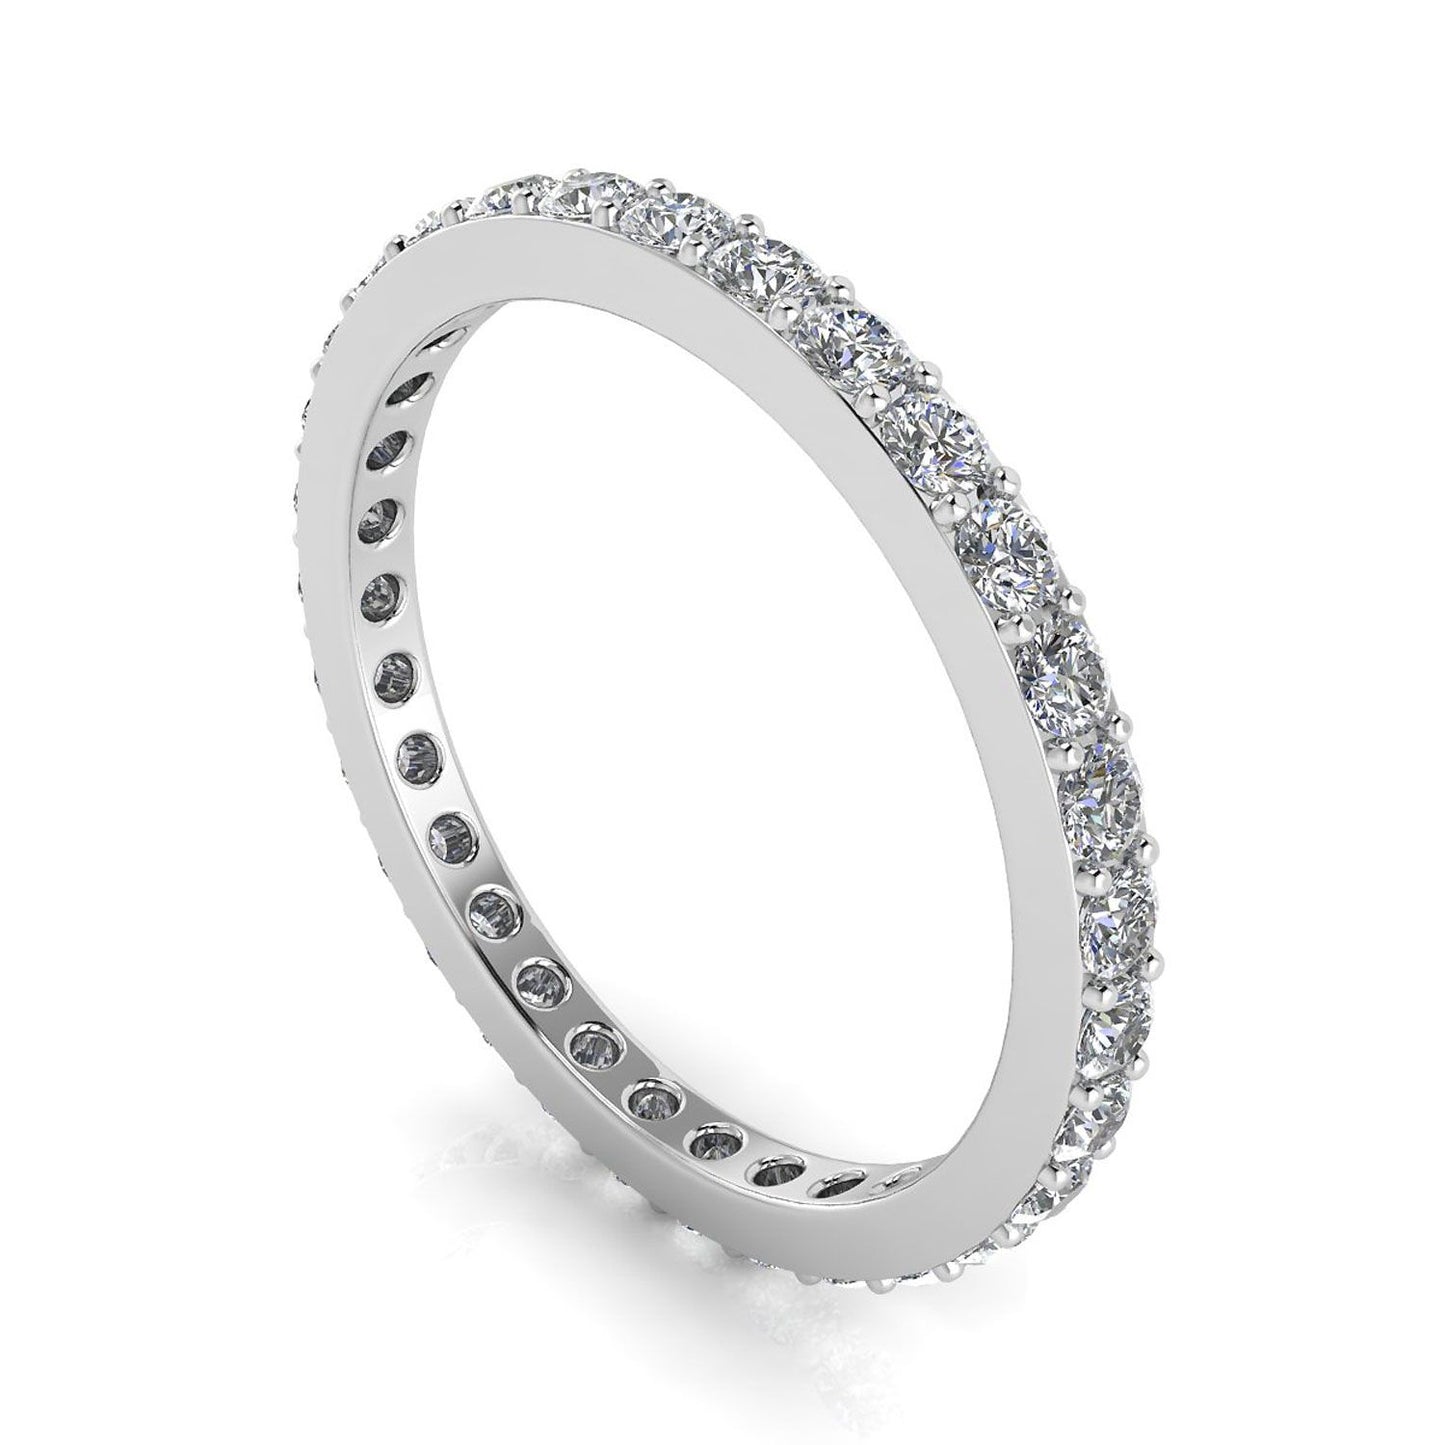 Round Brilliant Cut Diamond Pave Set Eternity Ring In 18k White Gold  (1.31ct. Tw.) Ring Size 4